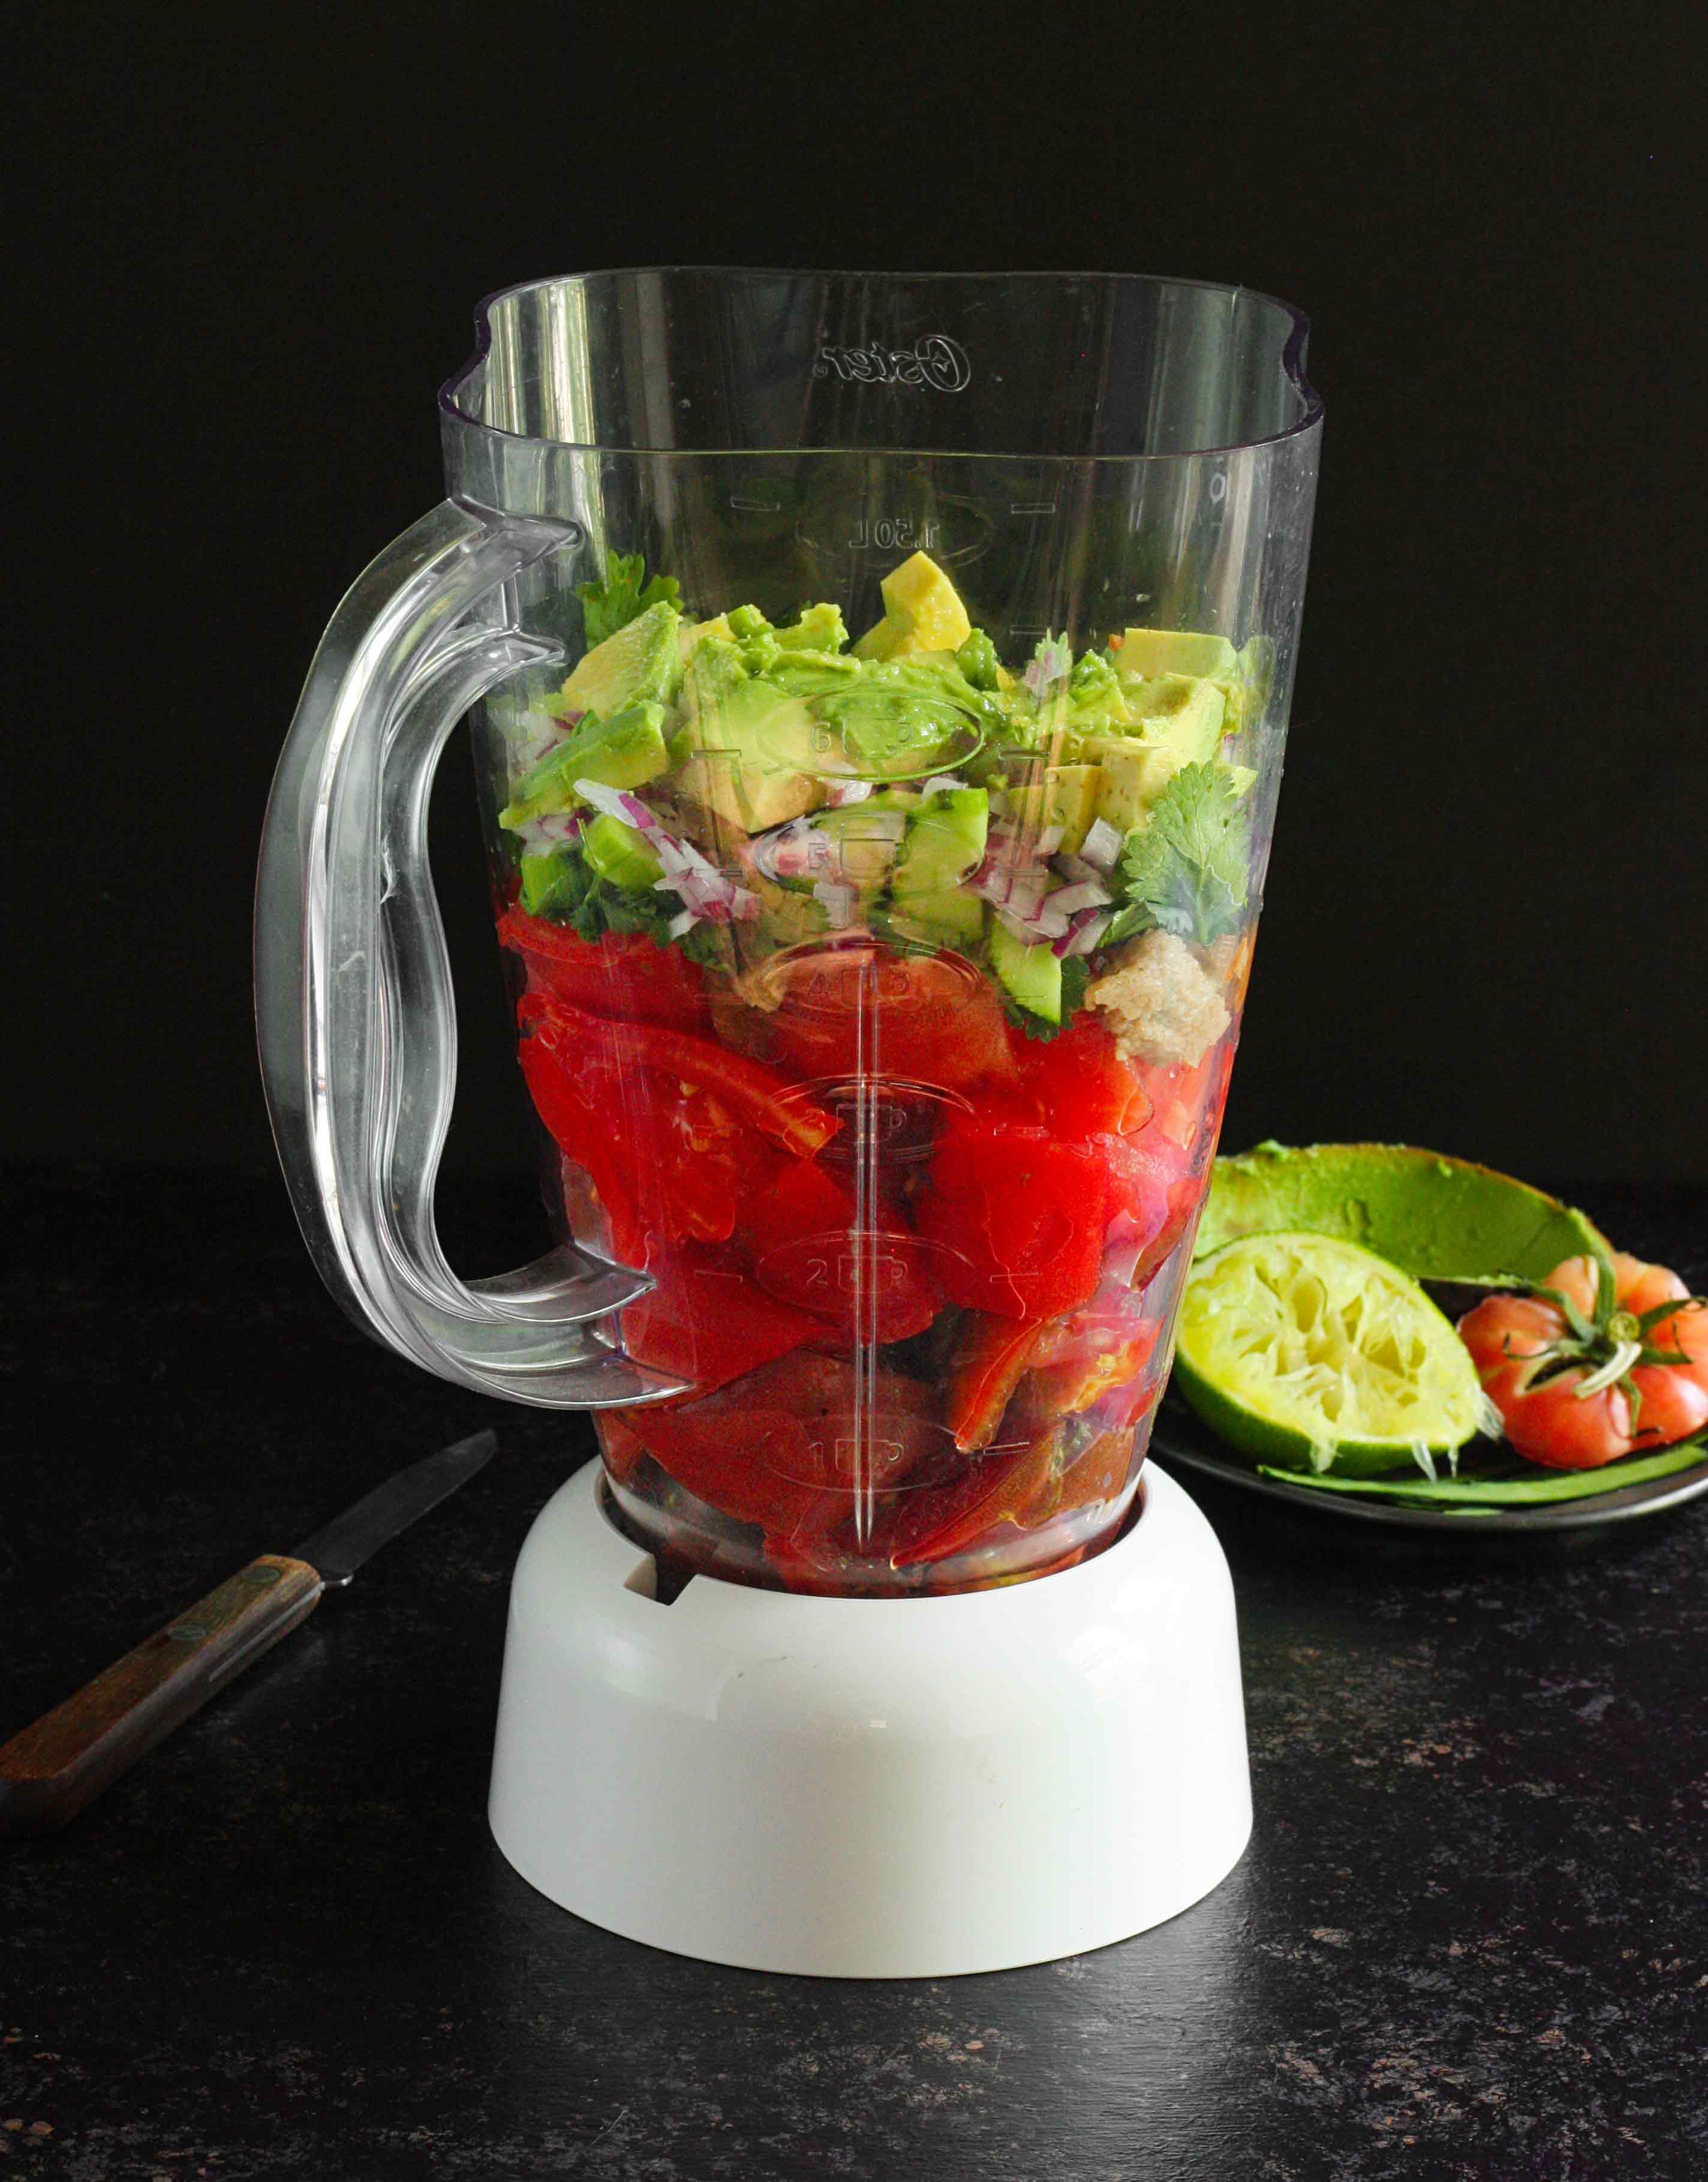 Ingredients for guacpacho in a blender